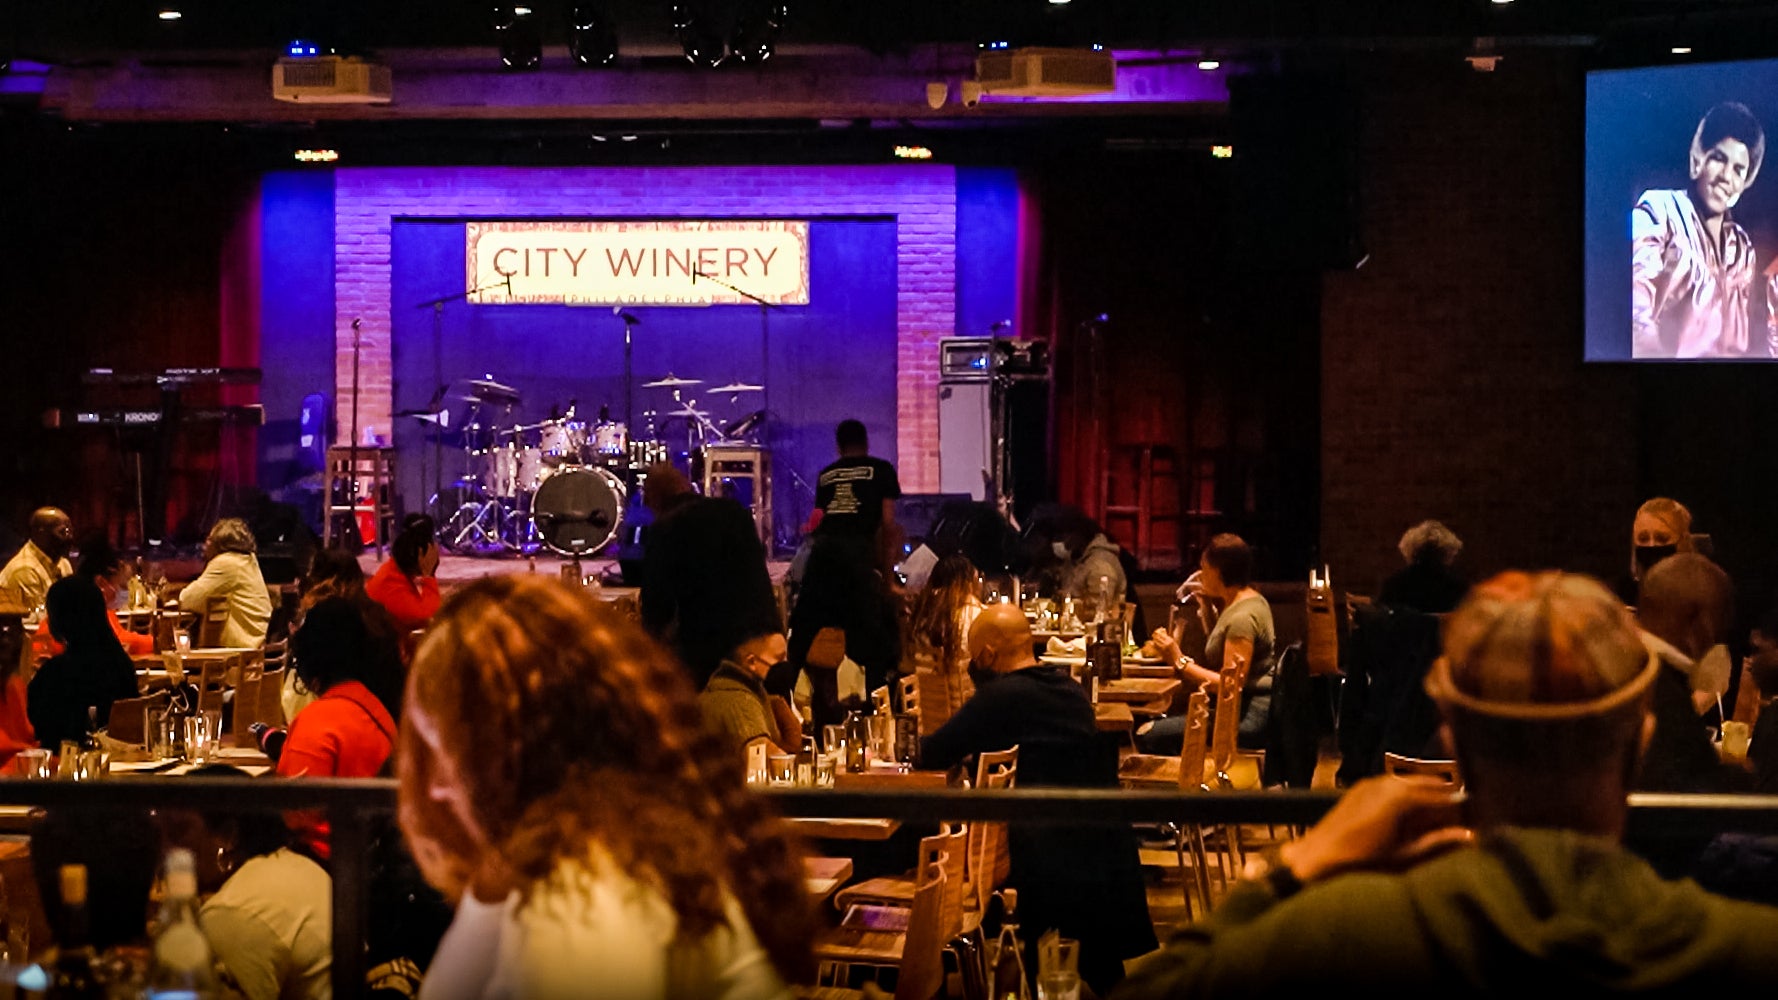 City Winery Serves Up Drinks and Entertainment in Philly’s Fashion